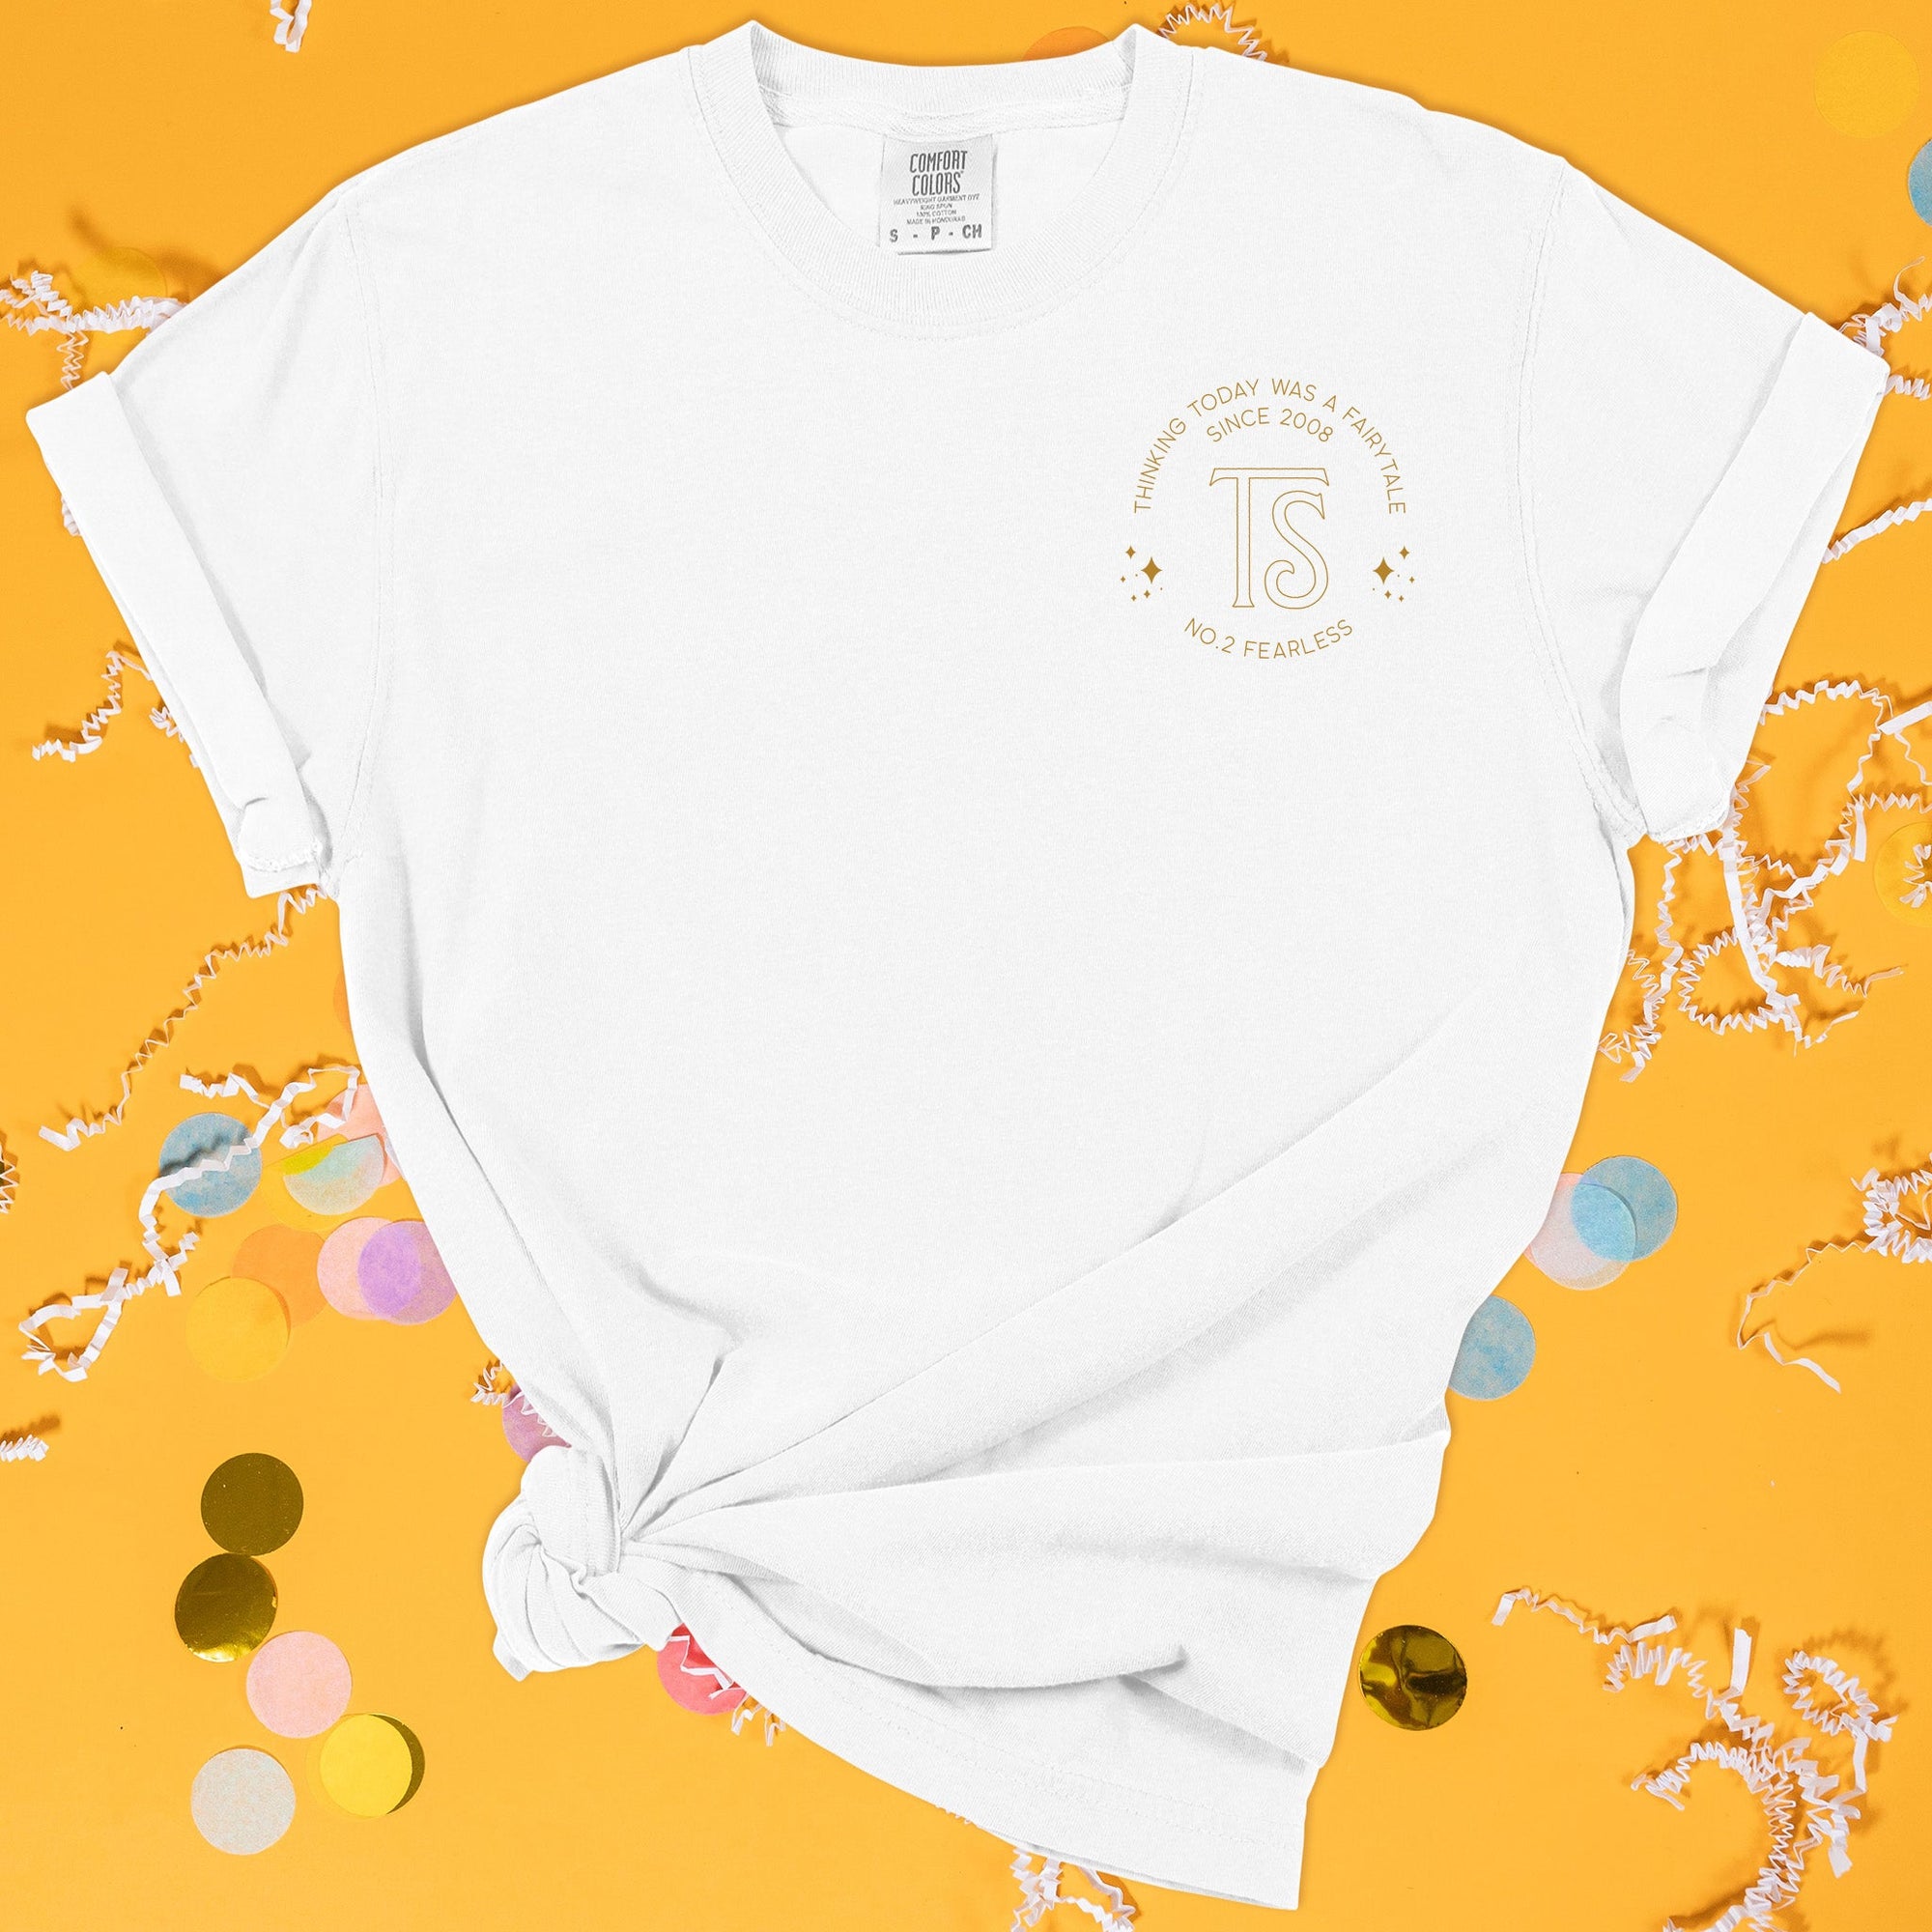 On a sunny mustard background sits the front of a t-shirt with white crinkle and big, colorful confetti scattered around. This Taylor Swift Inspired Reputation tee is white with gold lettering. There is a "TS" with shimmer sparkles over the left chest area and around it says "THINKING TODAY WAS A FAIRYTALE SINCE 2008, NO. 2 FEARLESS" in all caps.